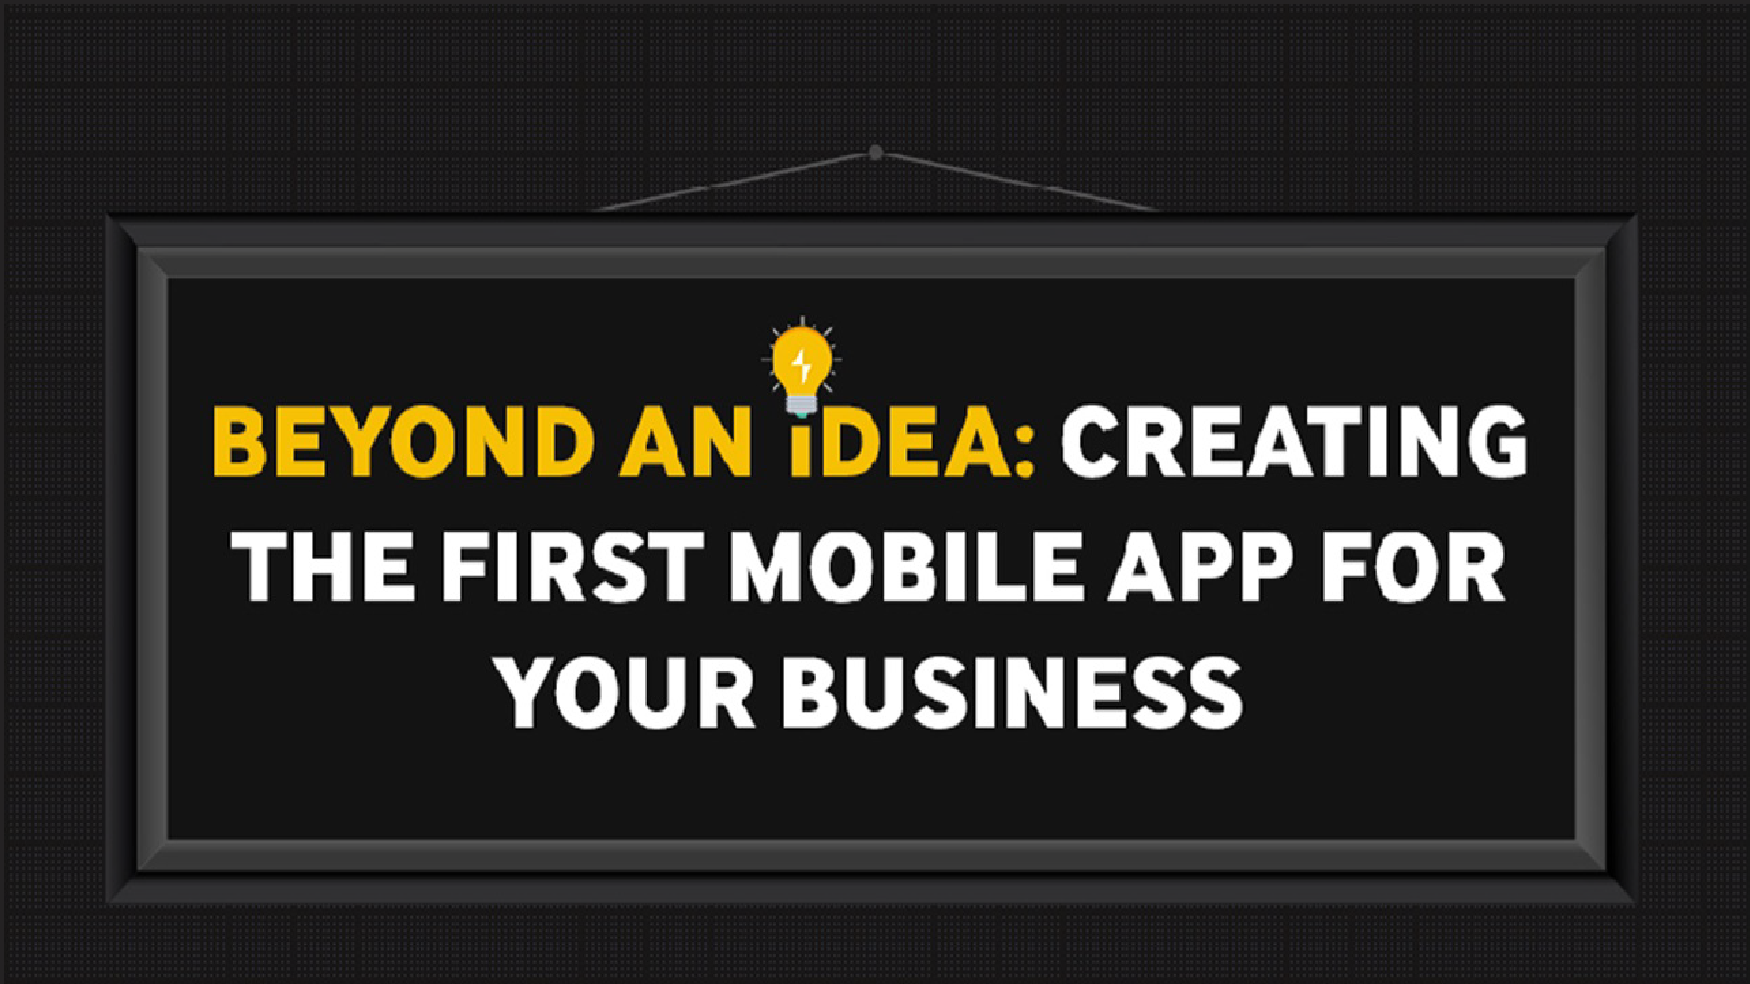 The 8 key things you need to know before building a mobile App for your business